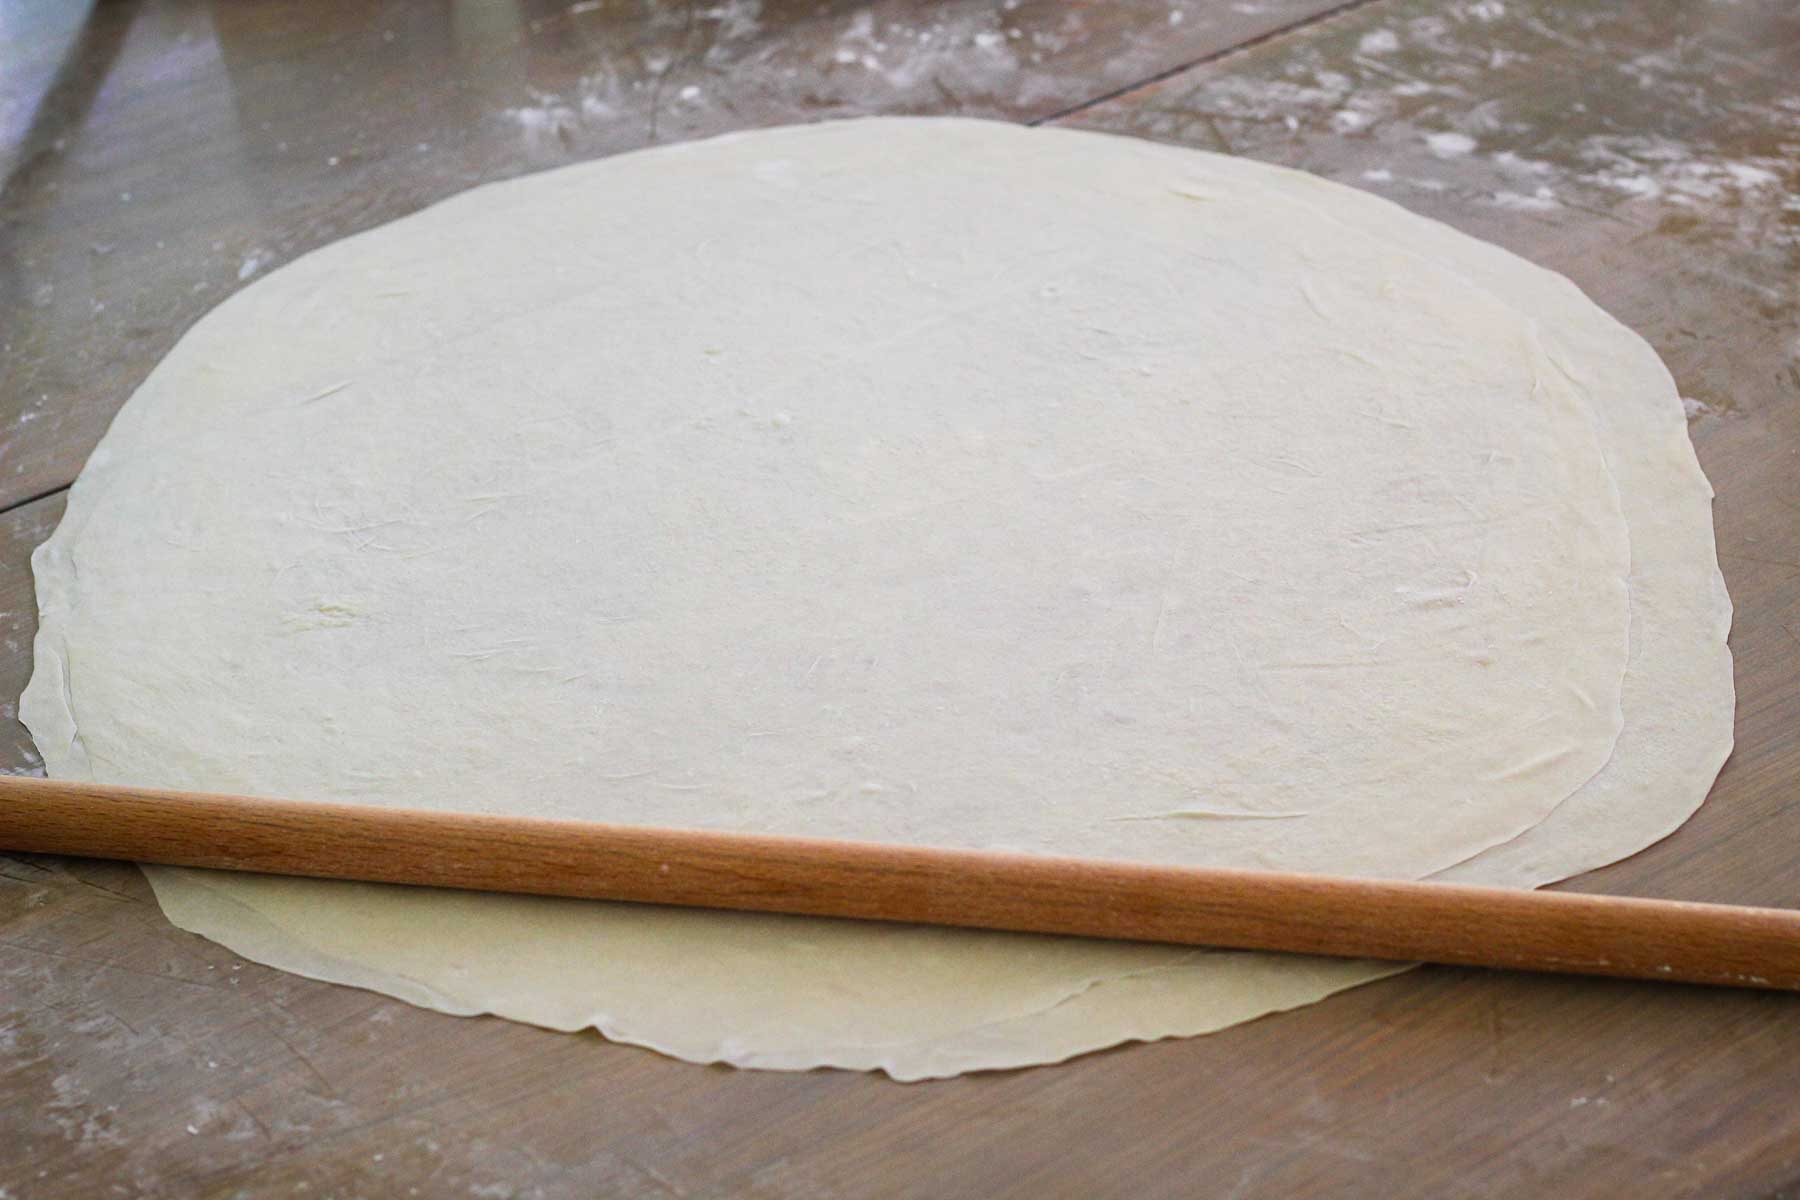 A phyllo layer stretched over the tabletop with a thin rolling pin on top.